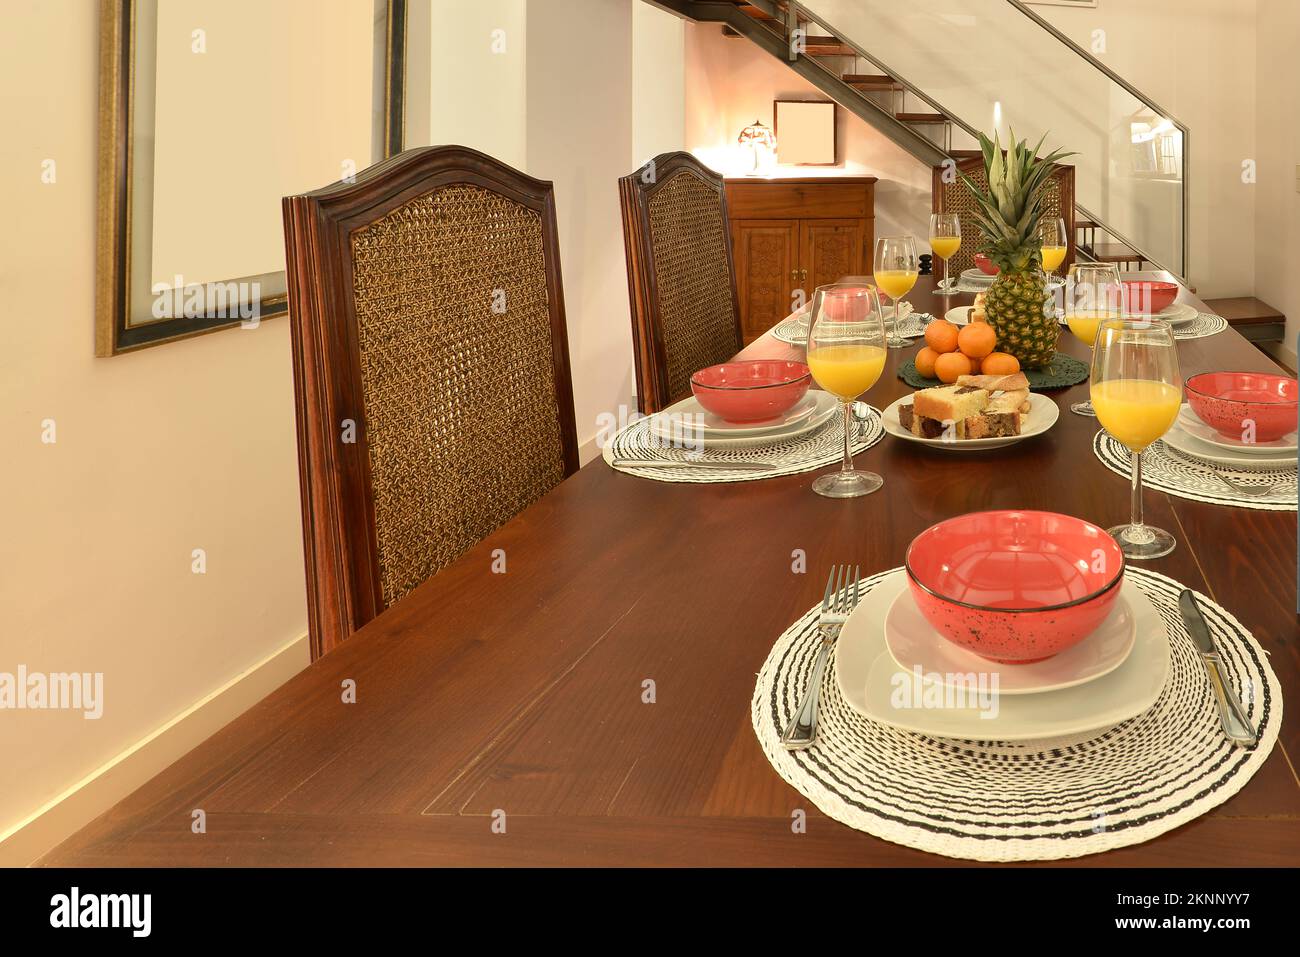 https://c8.alamy.com/comp/2KNNYY7/one-side-of-a-long-mahogany-dining-table-with-mahogany-armchairs-and-a-breakfast-service-of-fruit-and-orange-juice-in-crystal-goblets-2KNNYY7.jpg